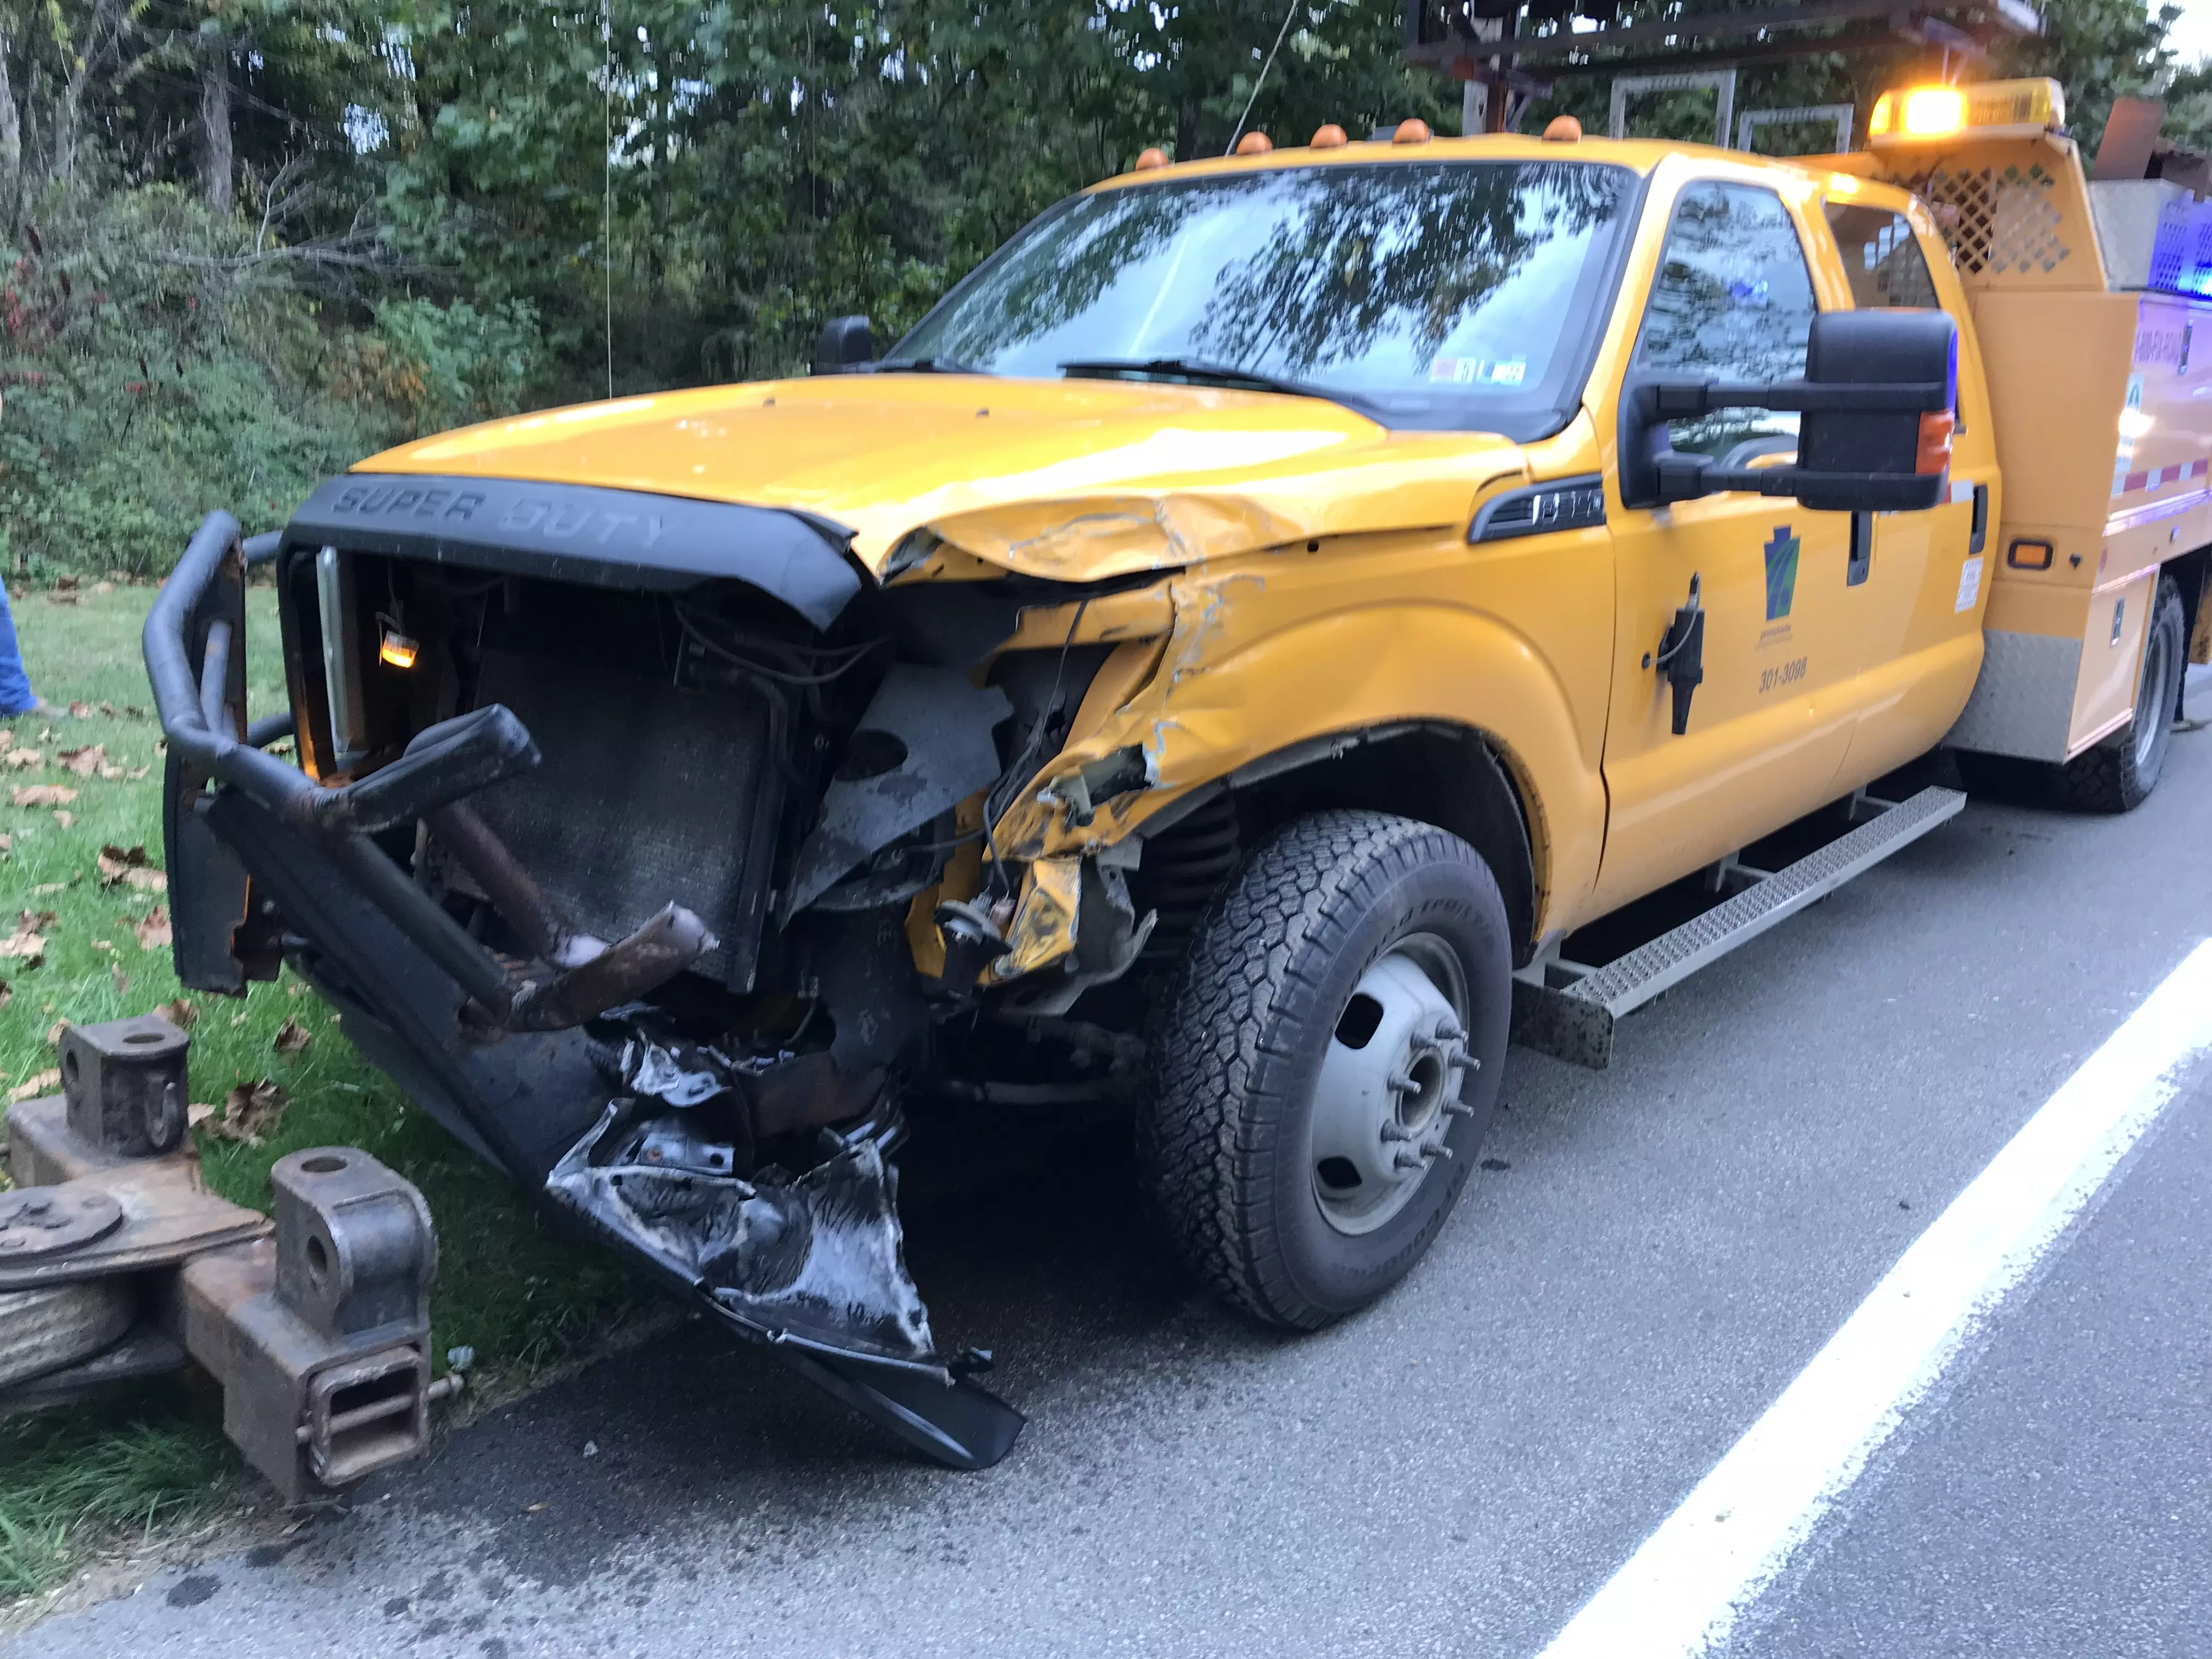 An image of a yellow PennDOT crew cab pickup truck with a damaged front end.